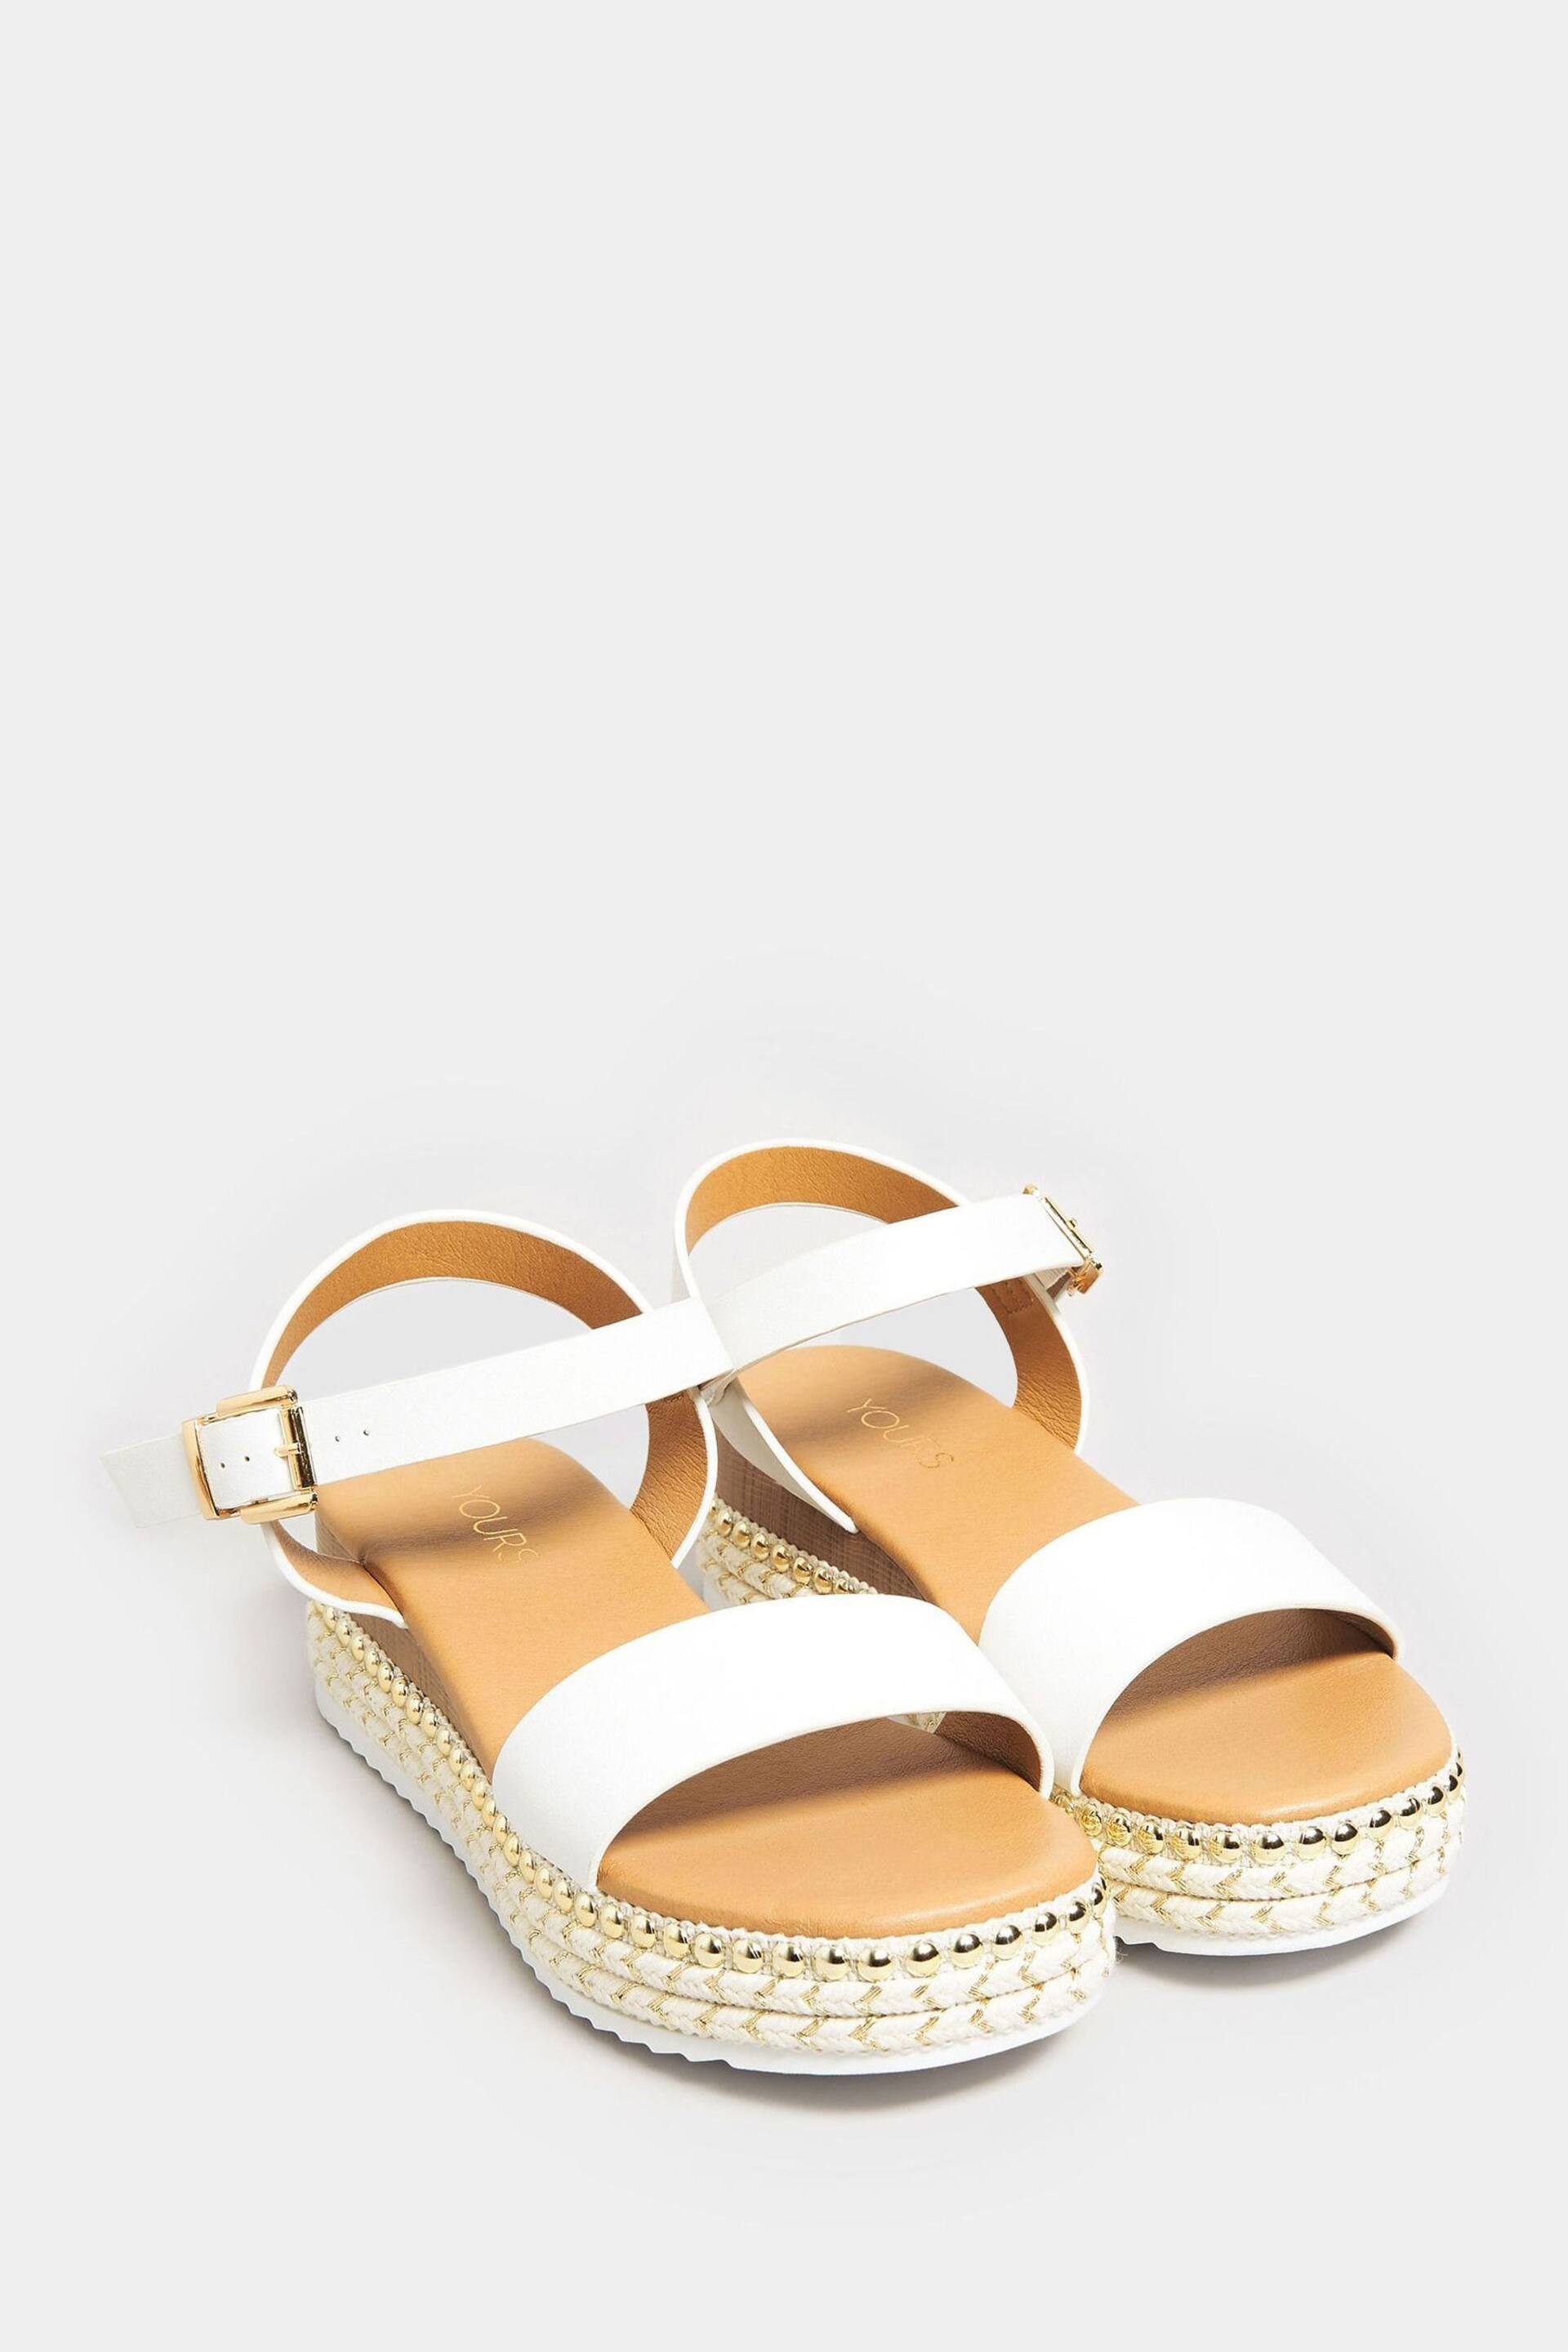 Yours Curve White Brown Wide Fit Wide Fit Diamante Flower Sandals - Image 2 of 4